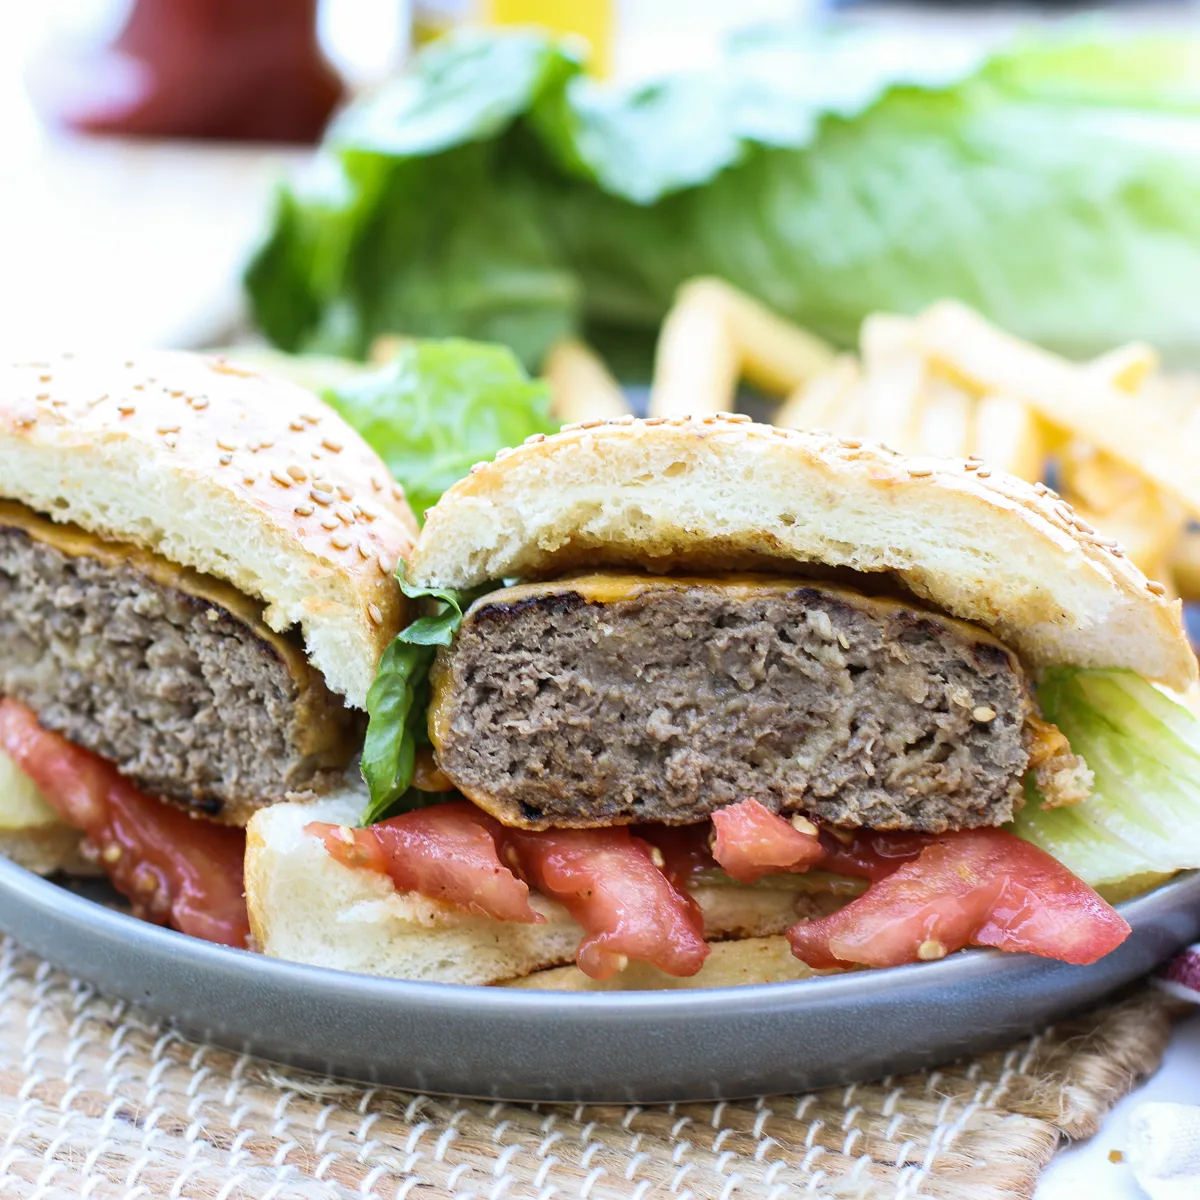 Best Elk Burger Recipe on a bun with lettuce, tomato, and cheese.